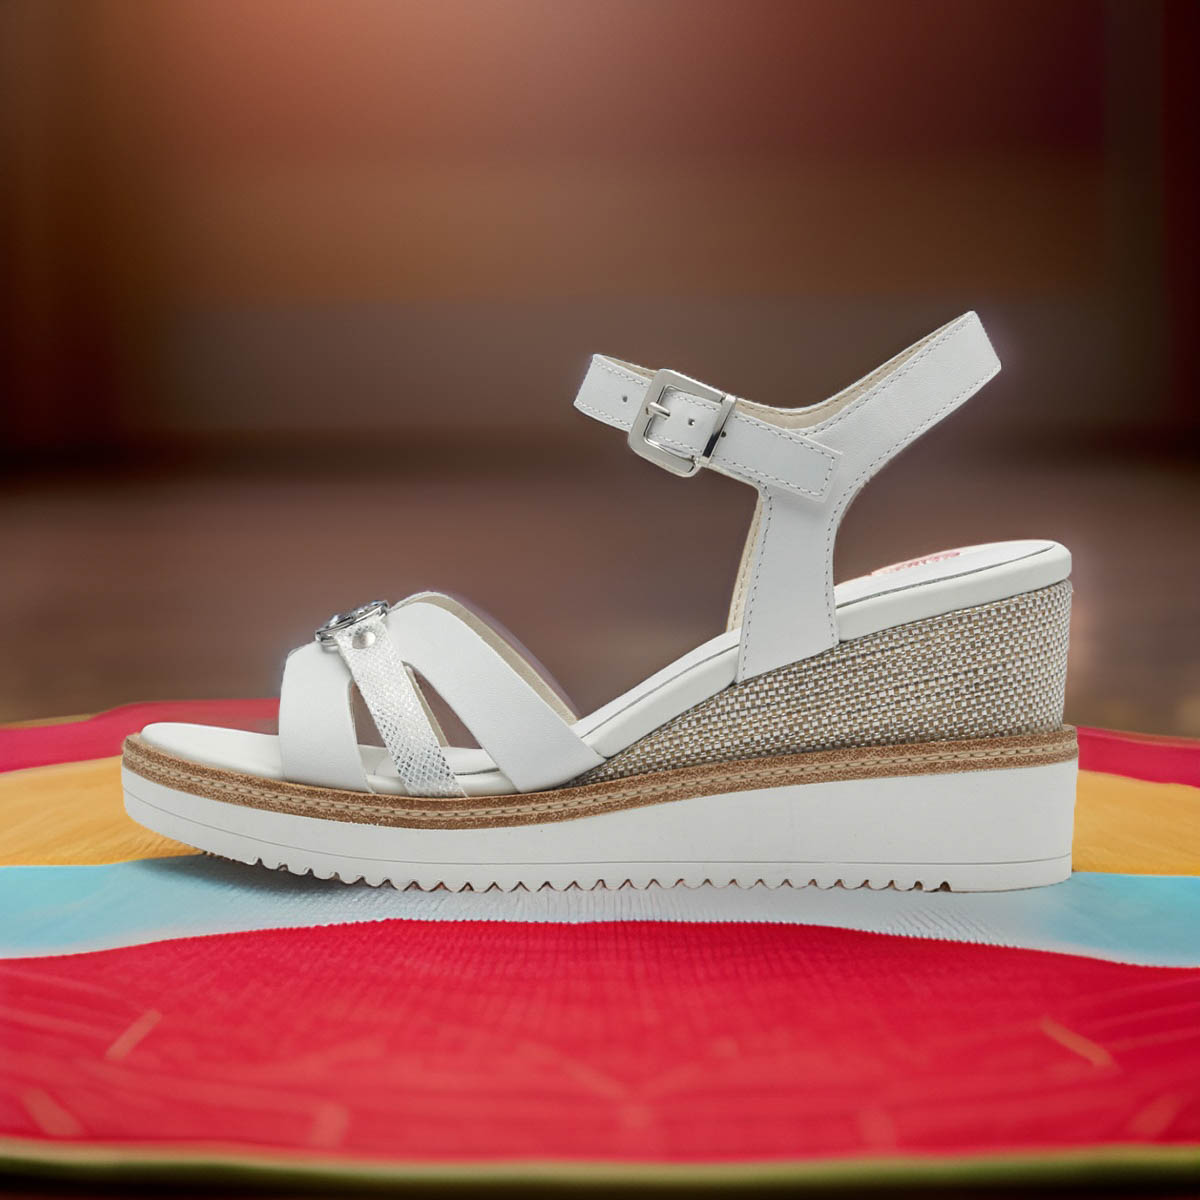 Tamaris White Leather Wedge Sandals with Silver Buckle